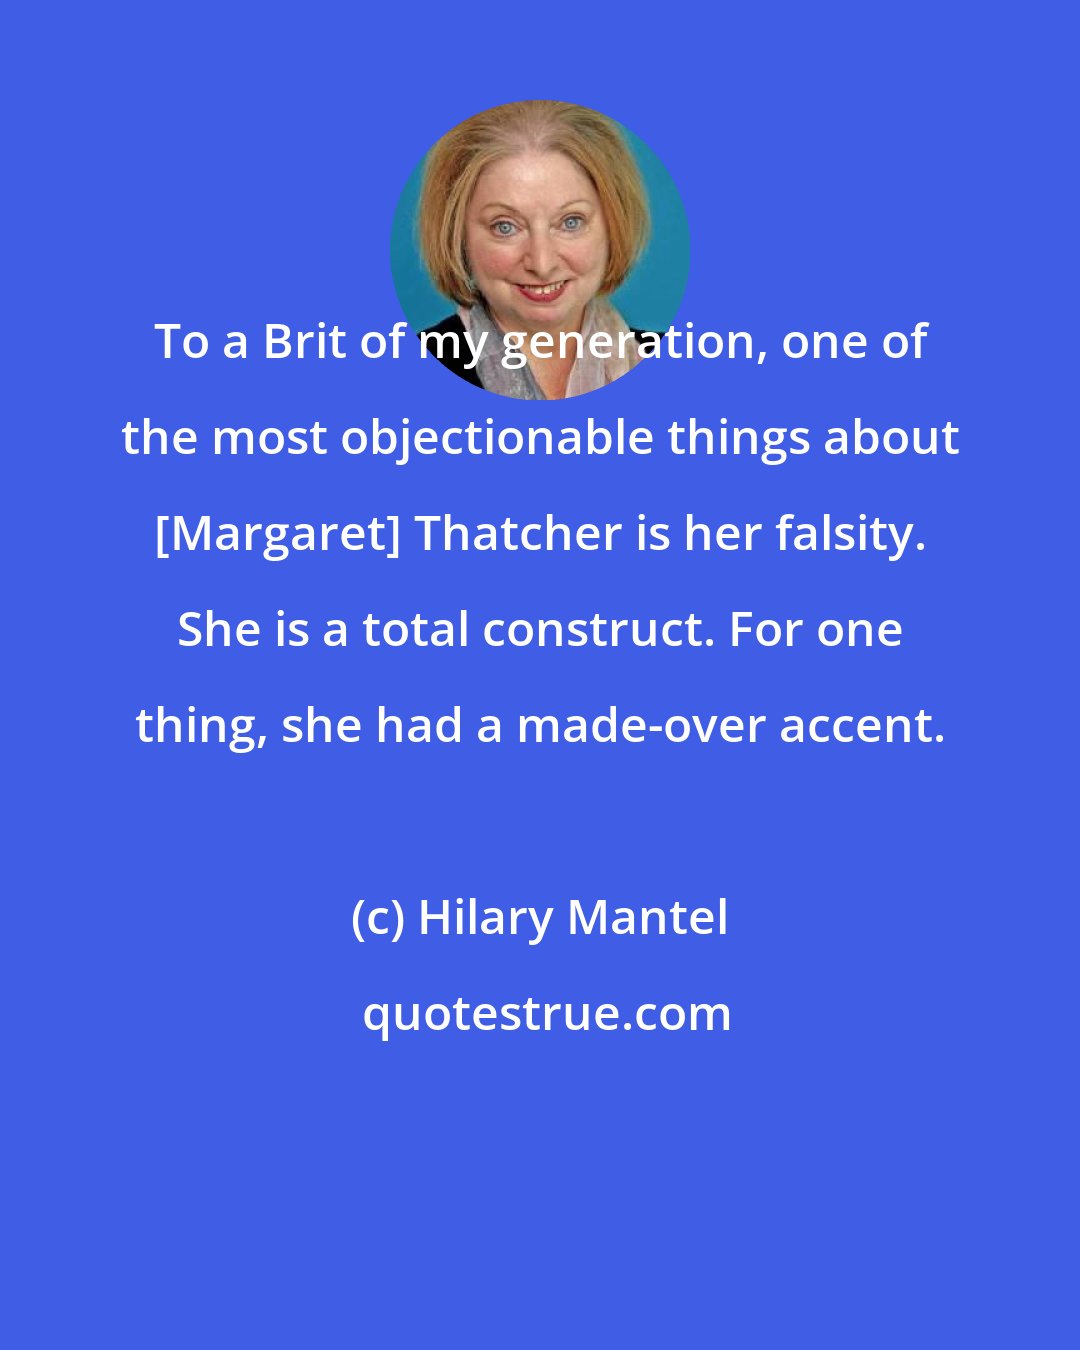 Hilary Mantel: To a Brit of my generation, one of the most objectionable things about [Margaret] Thatcher is her falsity. She is a total construct. For one thing, she had a made-over accent.